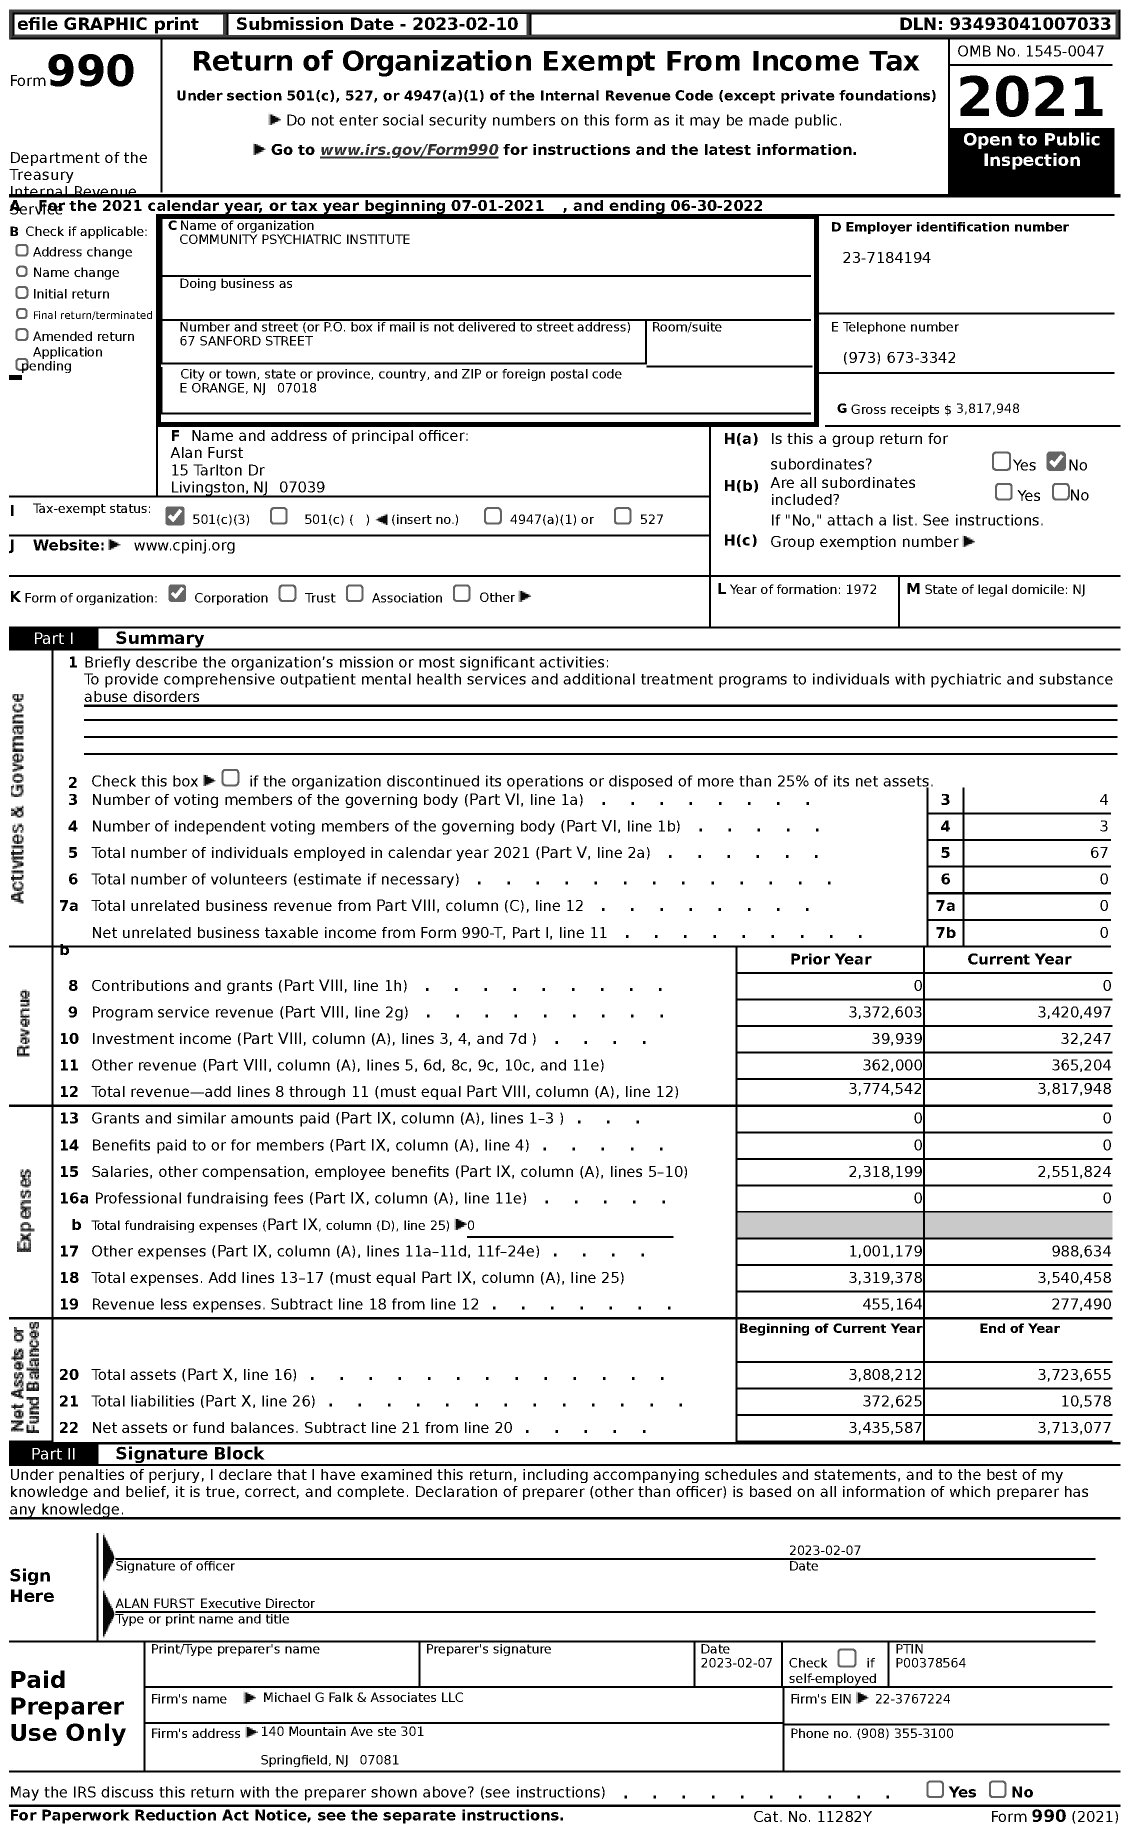 Image of first page of 2021 Form 990 for Community Psychiatric Institute (CPI)